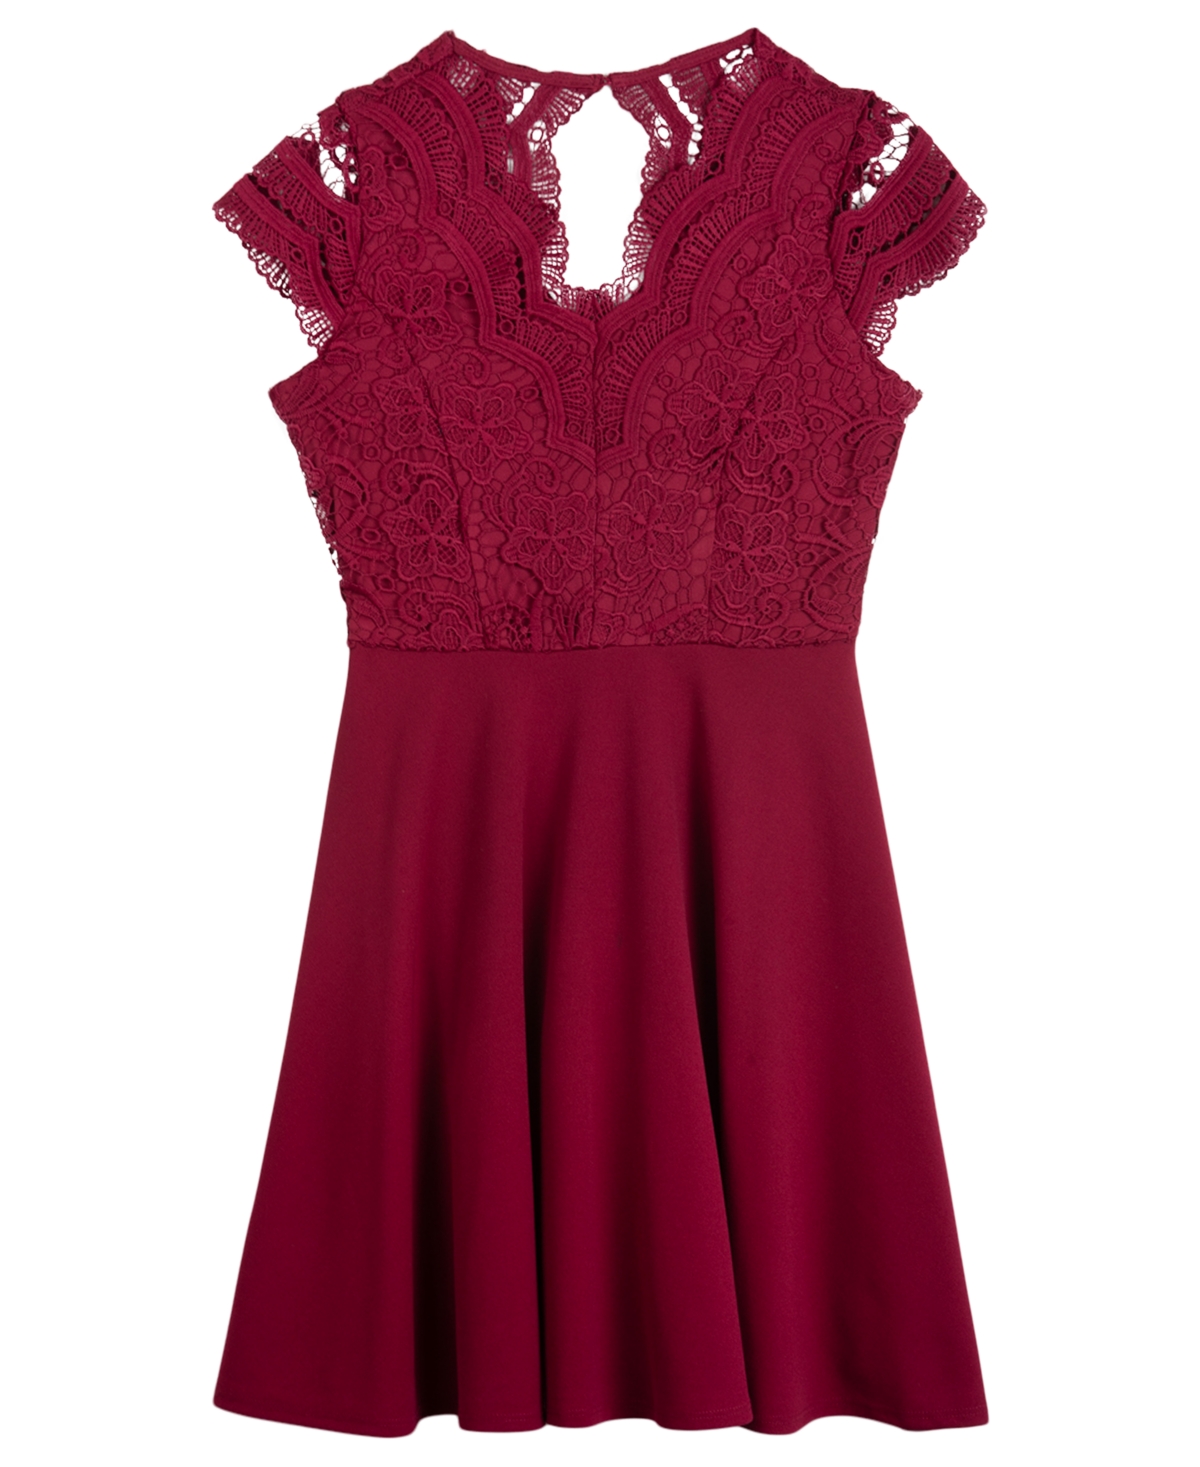 Rare Editions Big Girls Lace Bodice Skater Dress In Burgundy